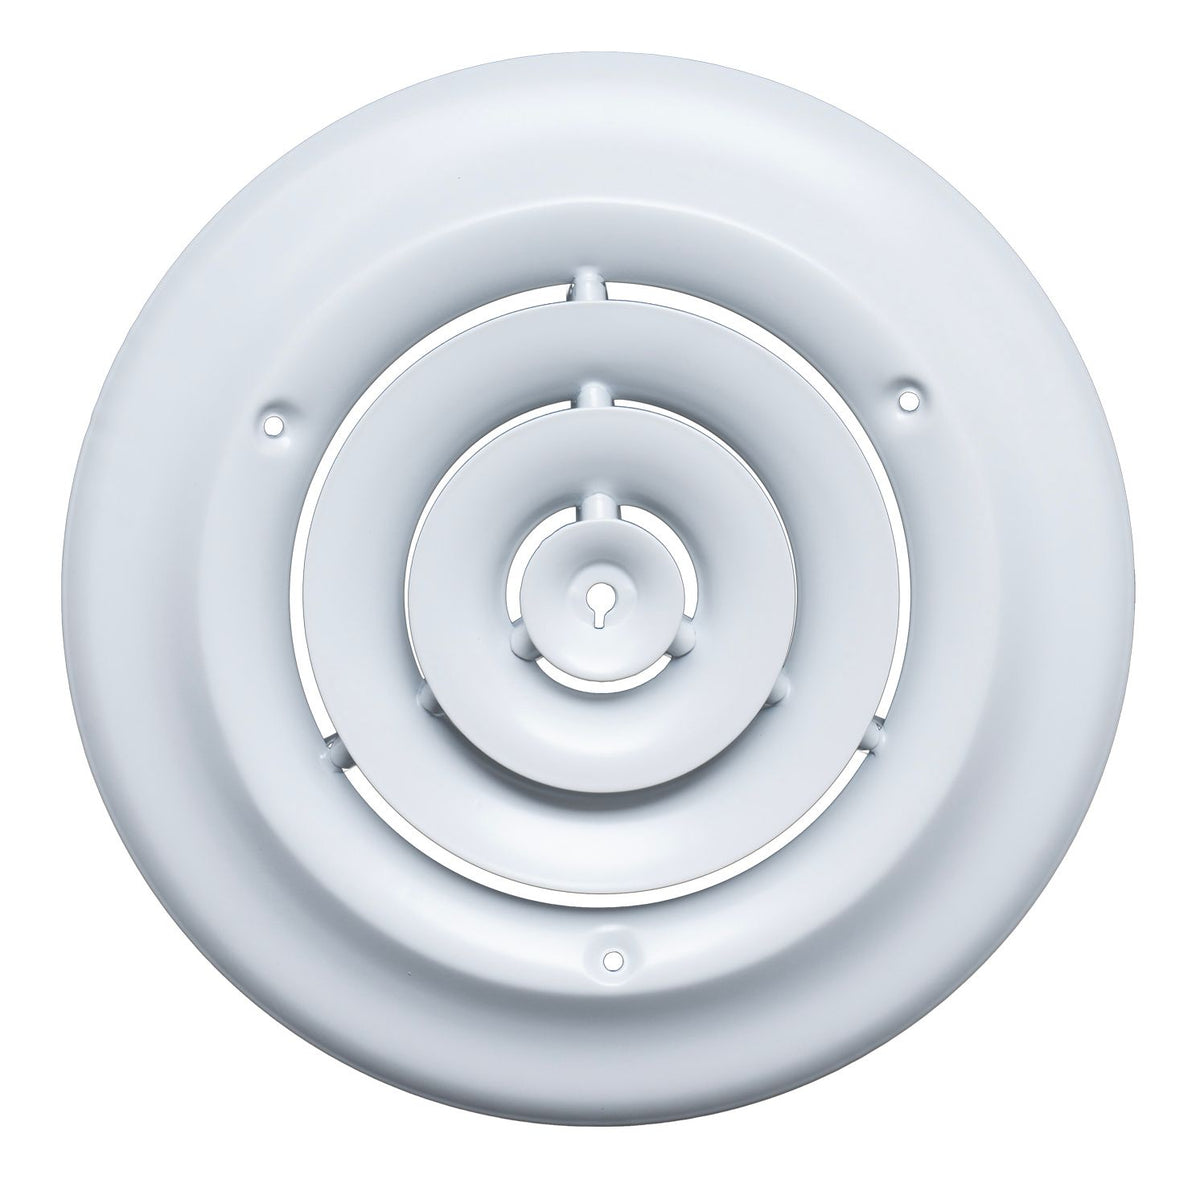 Handua 6" [Neck Size] Steel Round Air Supply Diffuser for Ceiling - White - Outer Dimension: 9-15/16"